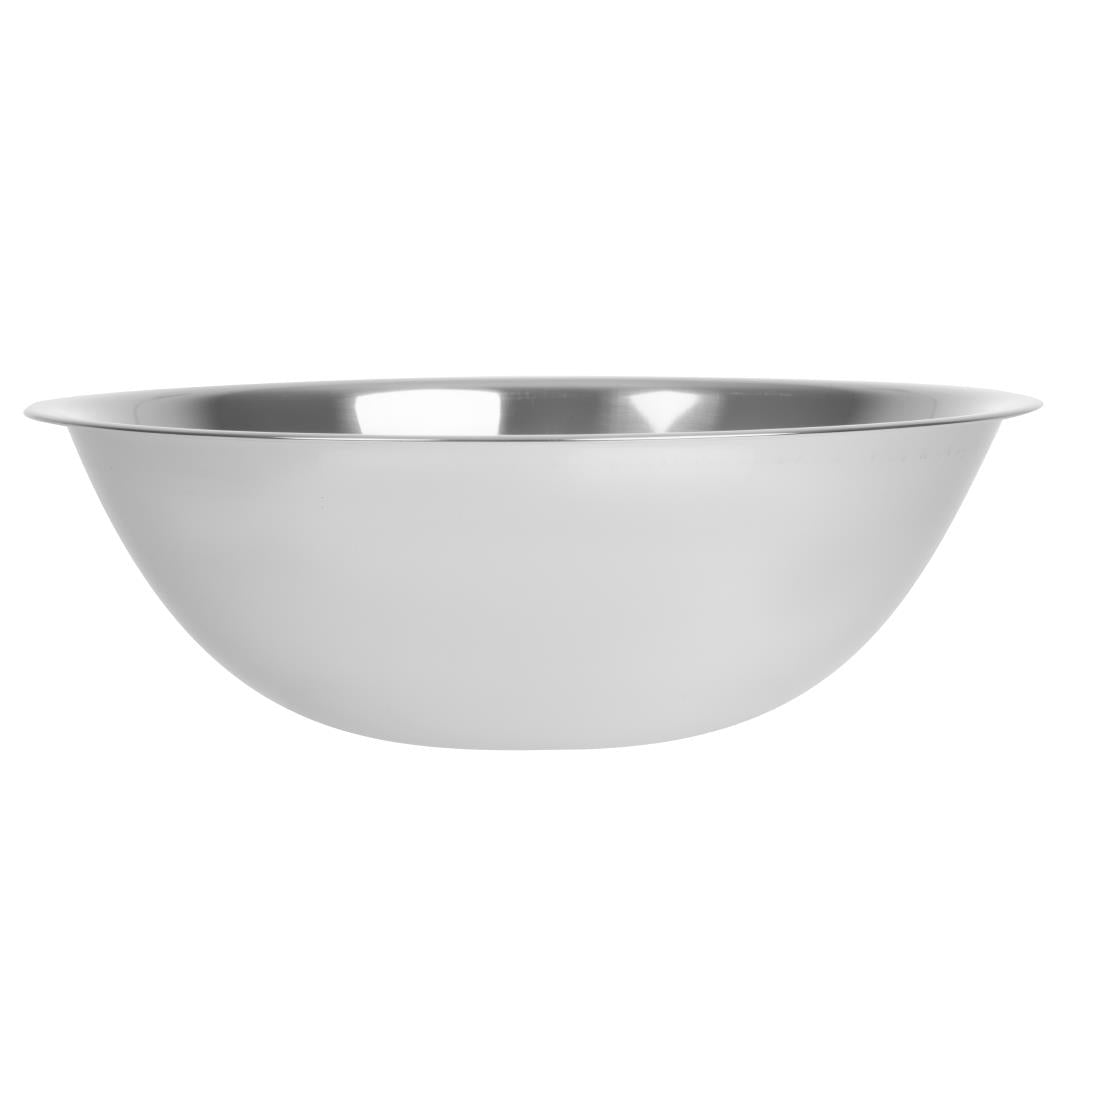 GC138 Vogue Stainless Steel Mixing Bowl 4.8Ltr JD Catering Equipment Solutions Ltd